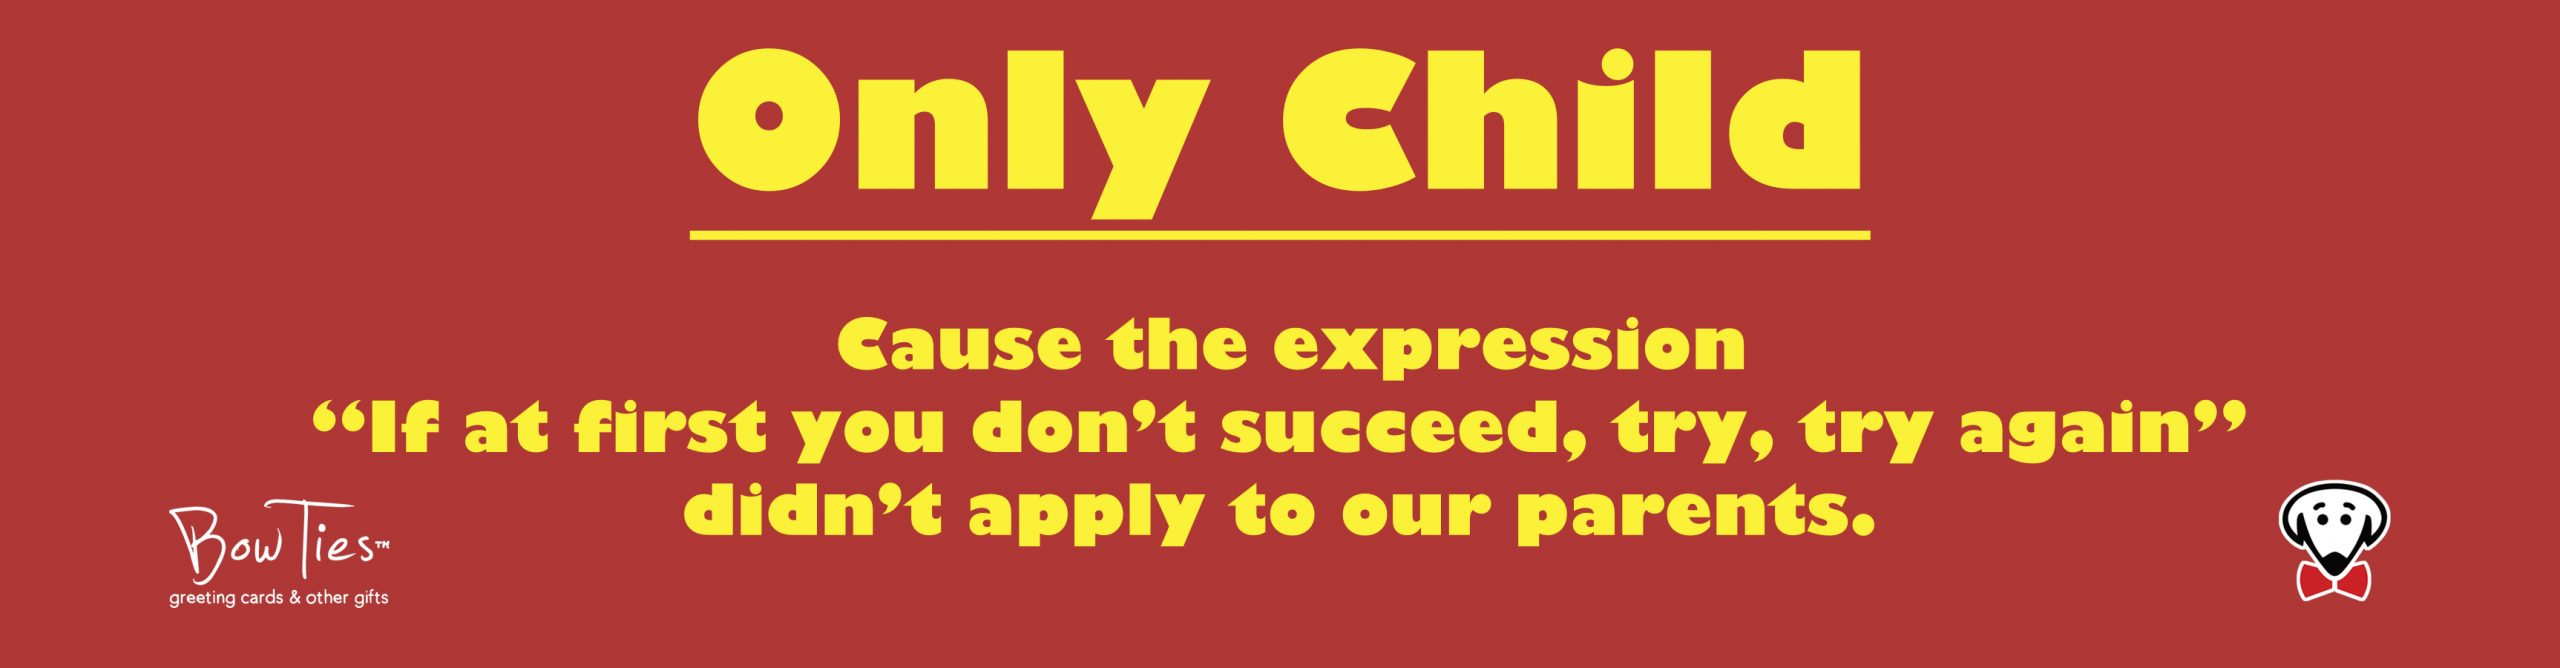 Only Child. Cause the expression “If at first you don’t succeed, try, try again” didn’t apply to our parents. – sticker